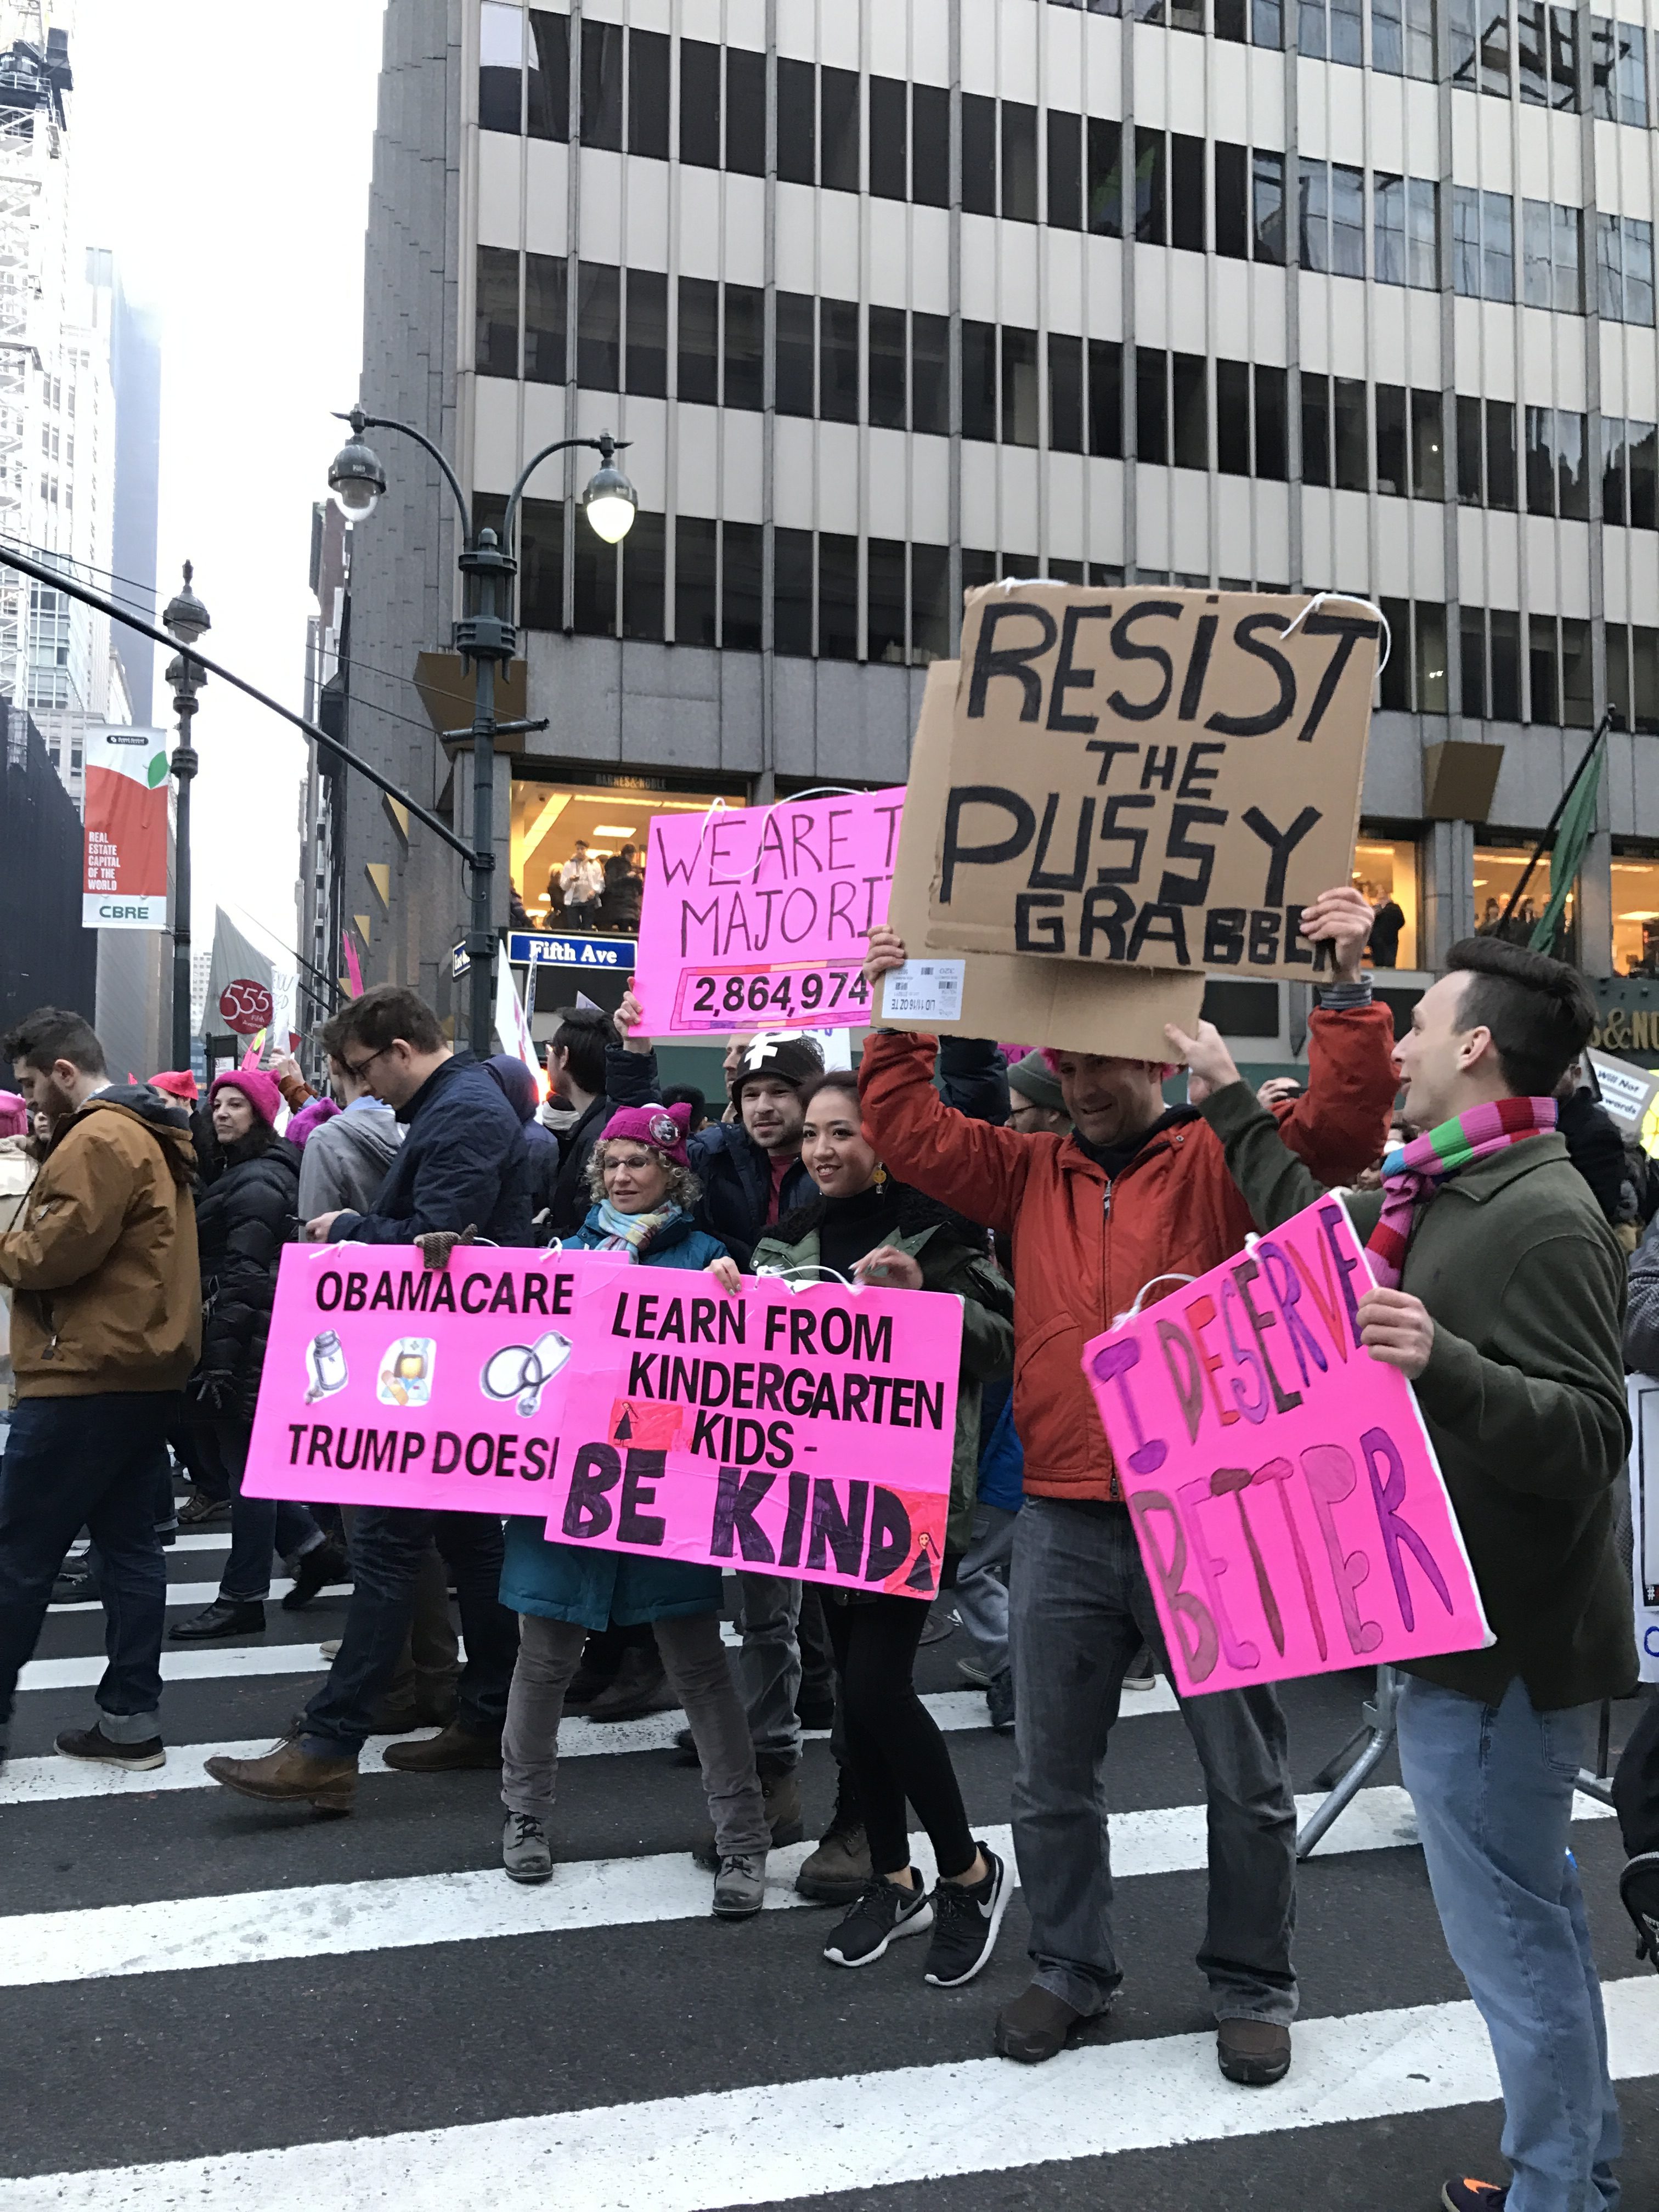 Examples of banners from the Women's March 2017 in NYC